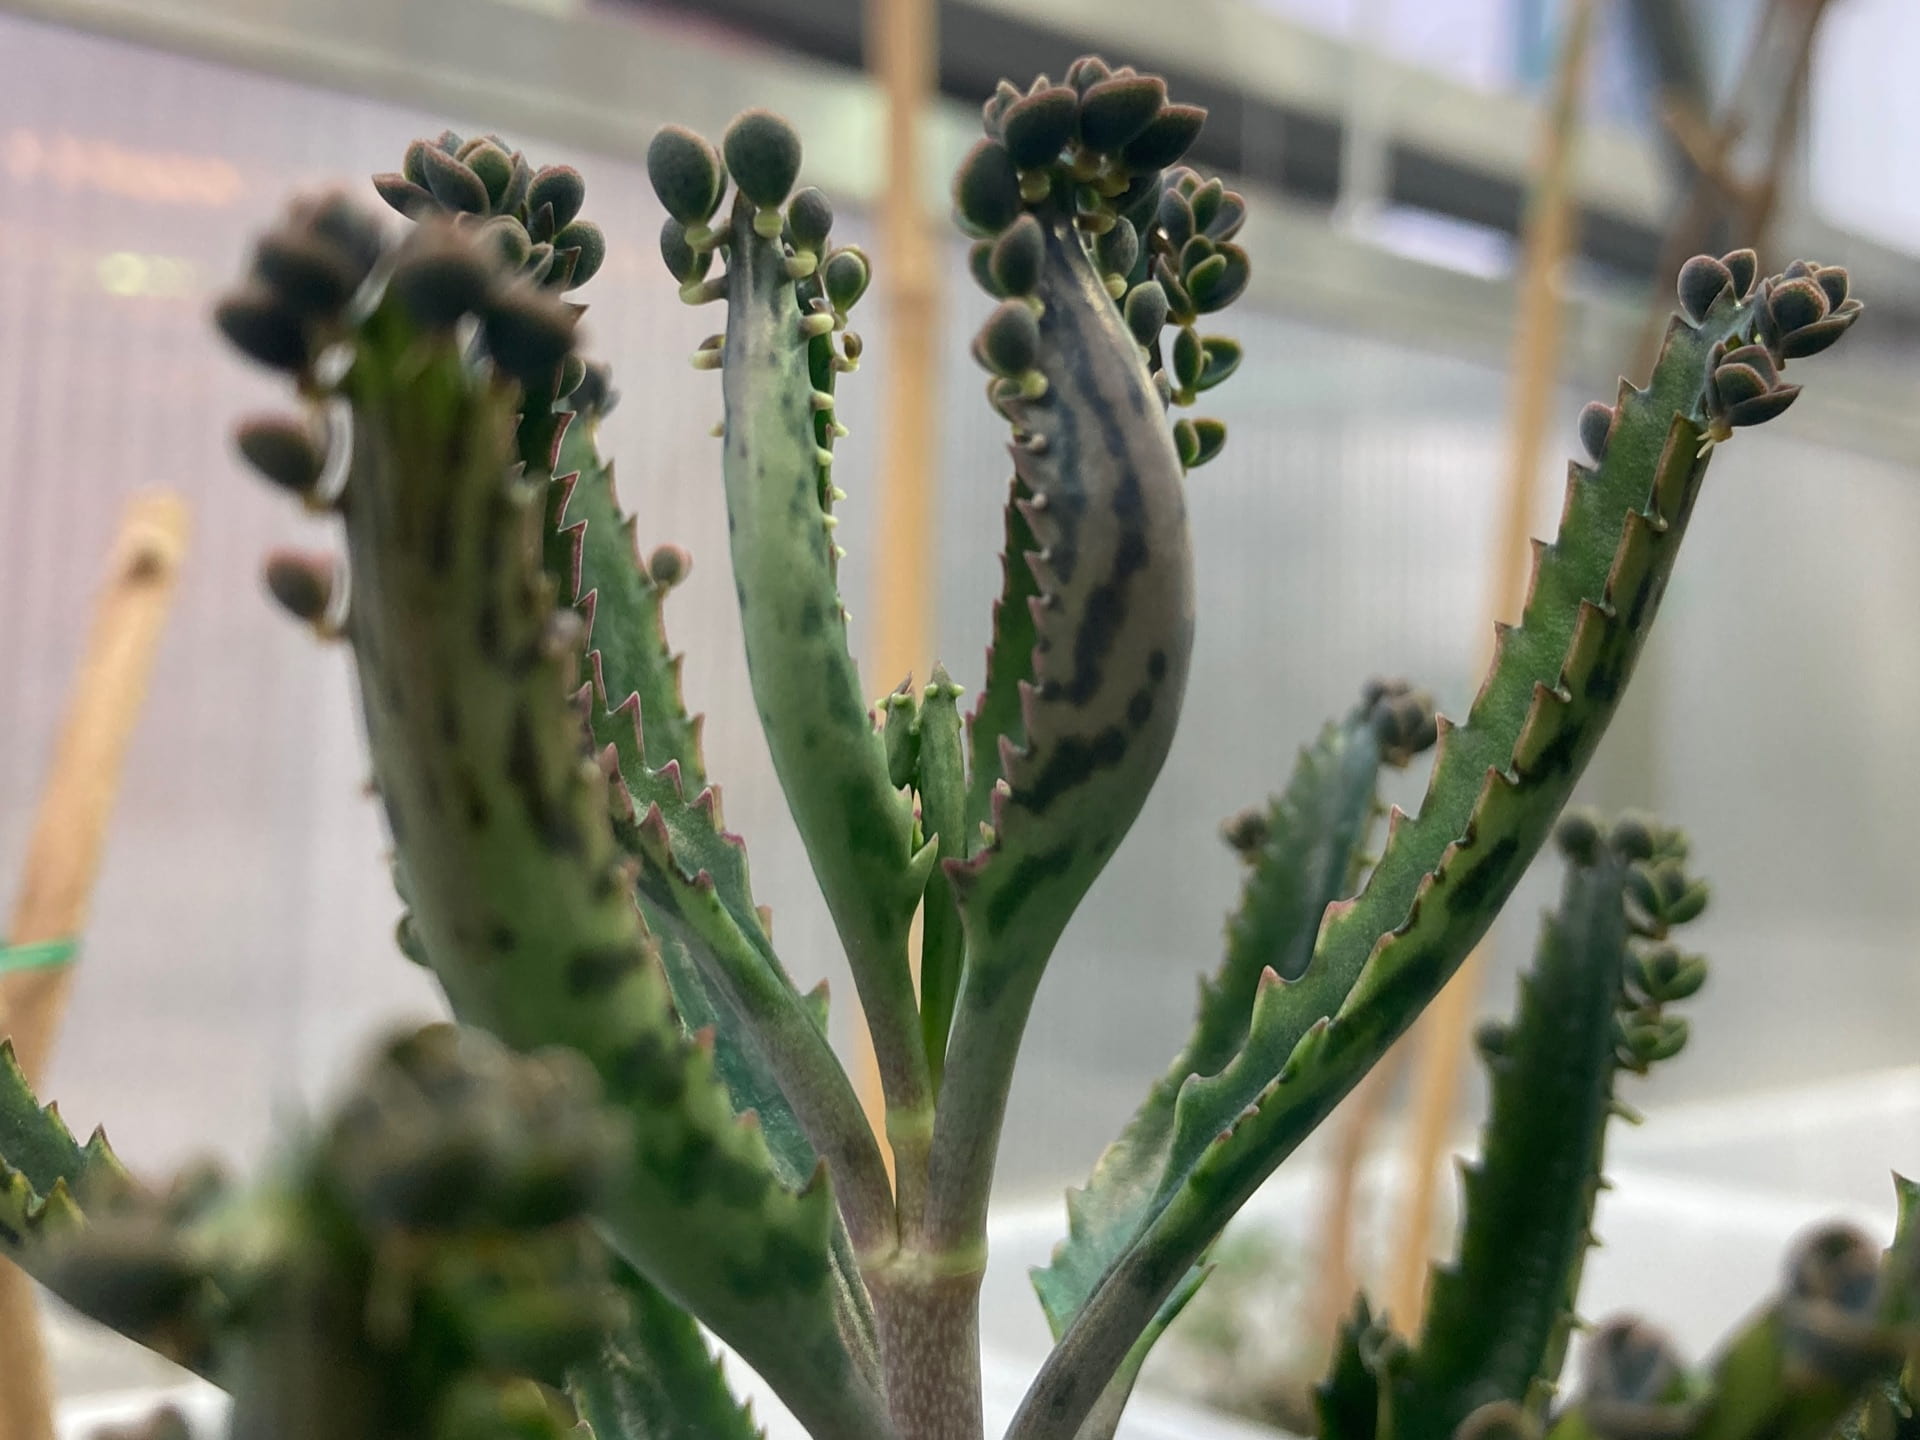 Some plants reproduce by growing plantlets, which will eventually drop off of the leaves and root into the soil beneath the parent plant. This adaption gives Kalanchoe spp. its common name, mother of thousands.